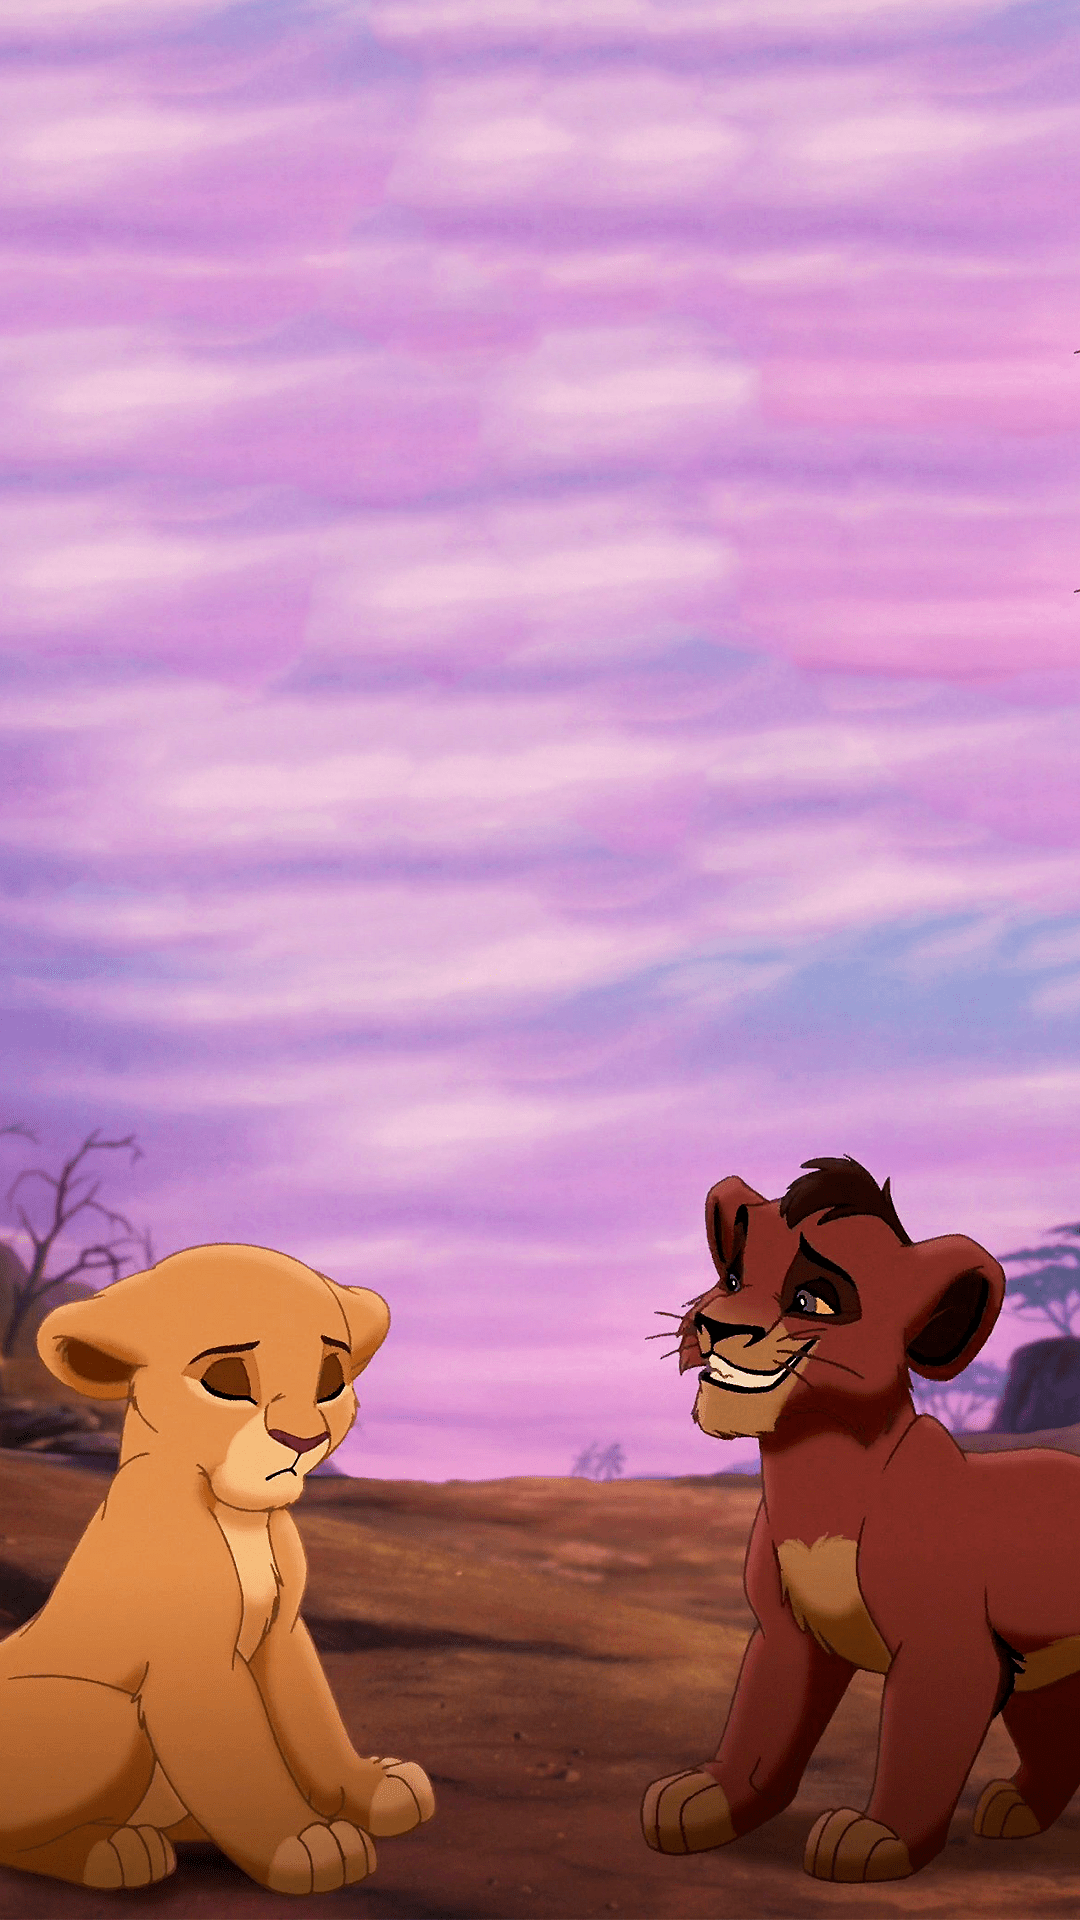 A cartoon of two lion cubs standing together - The Lion King, lion